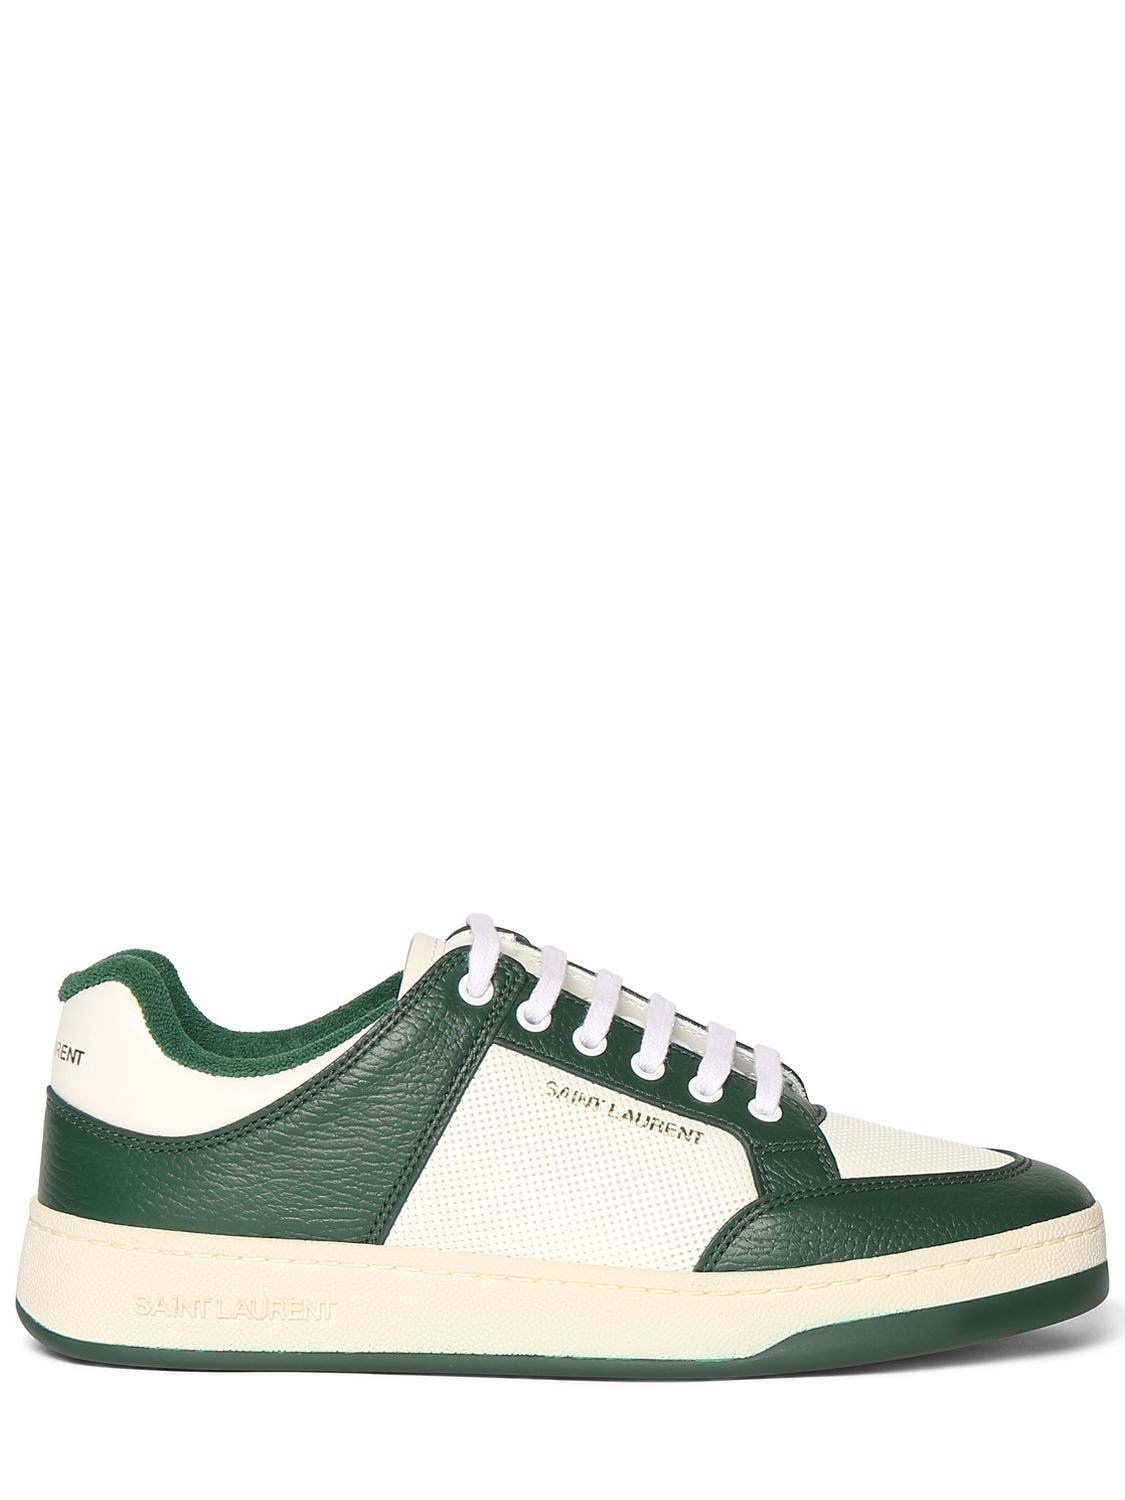 Shop Saint Laurent Sl/61 00 Leather Sneakers In White,green